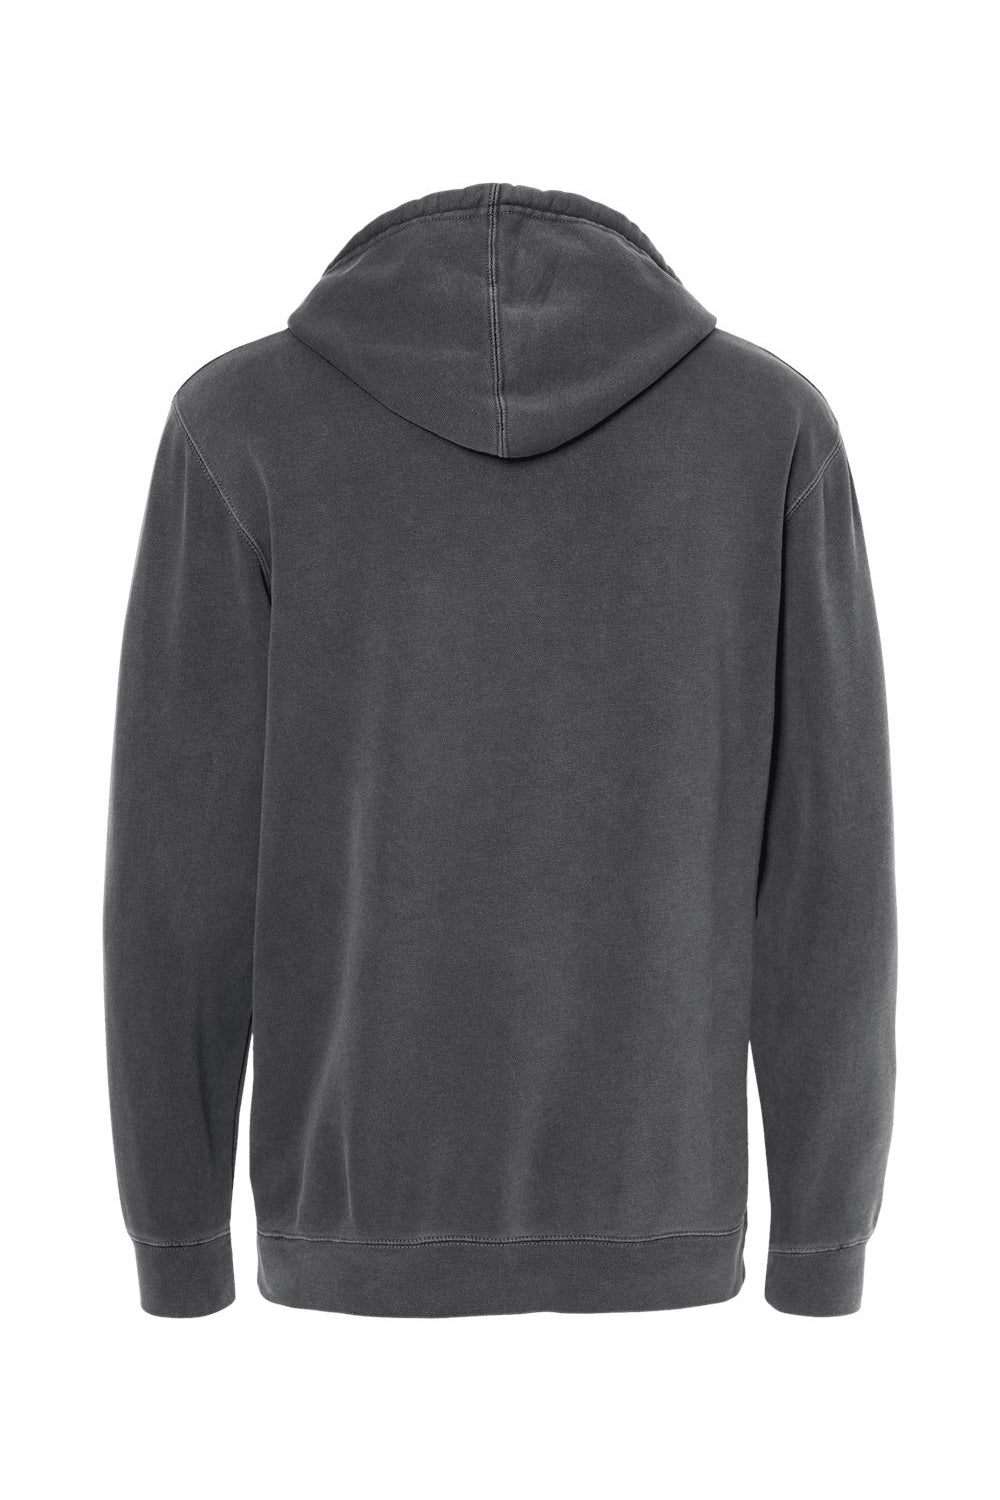 Independent Trading Co. PRM4500 Mens Pigment Dyed Hooded Sweatshirt Hoodie Black Flat Back